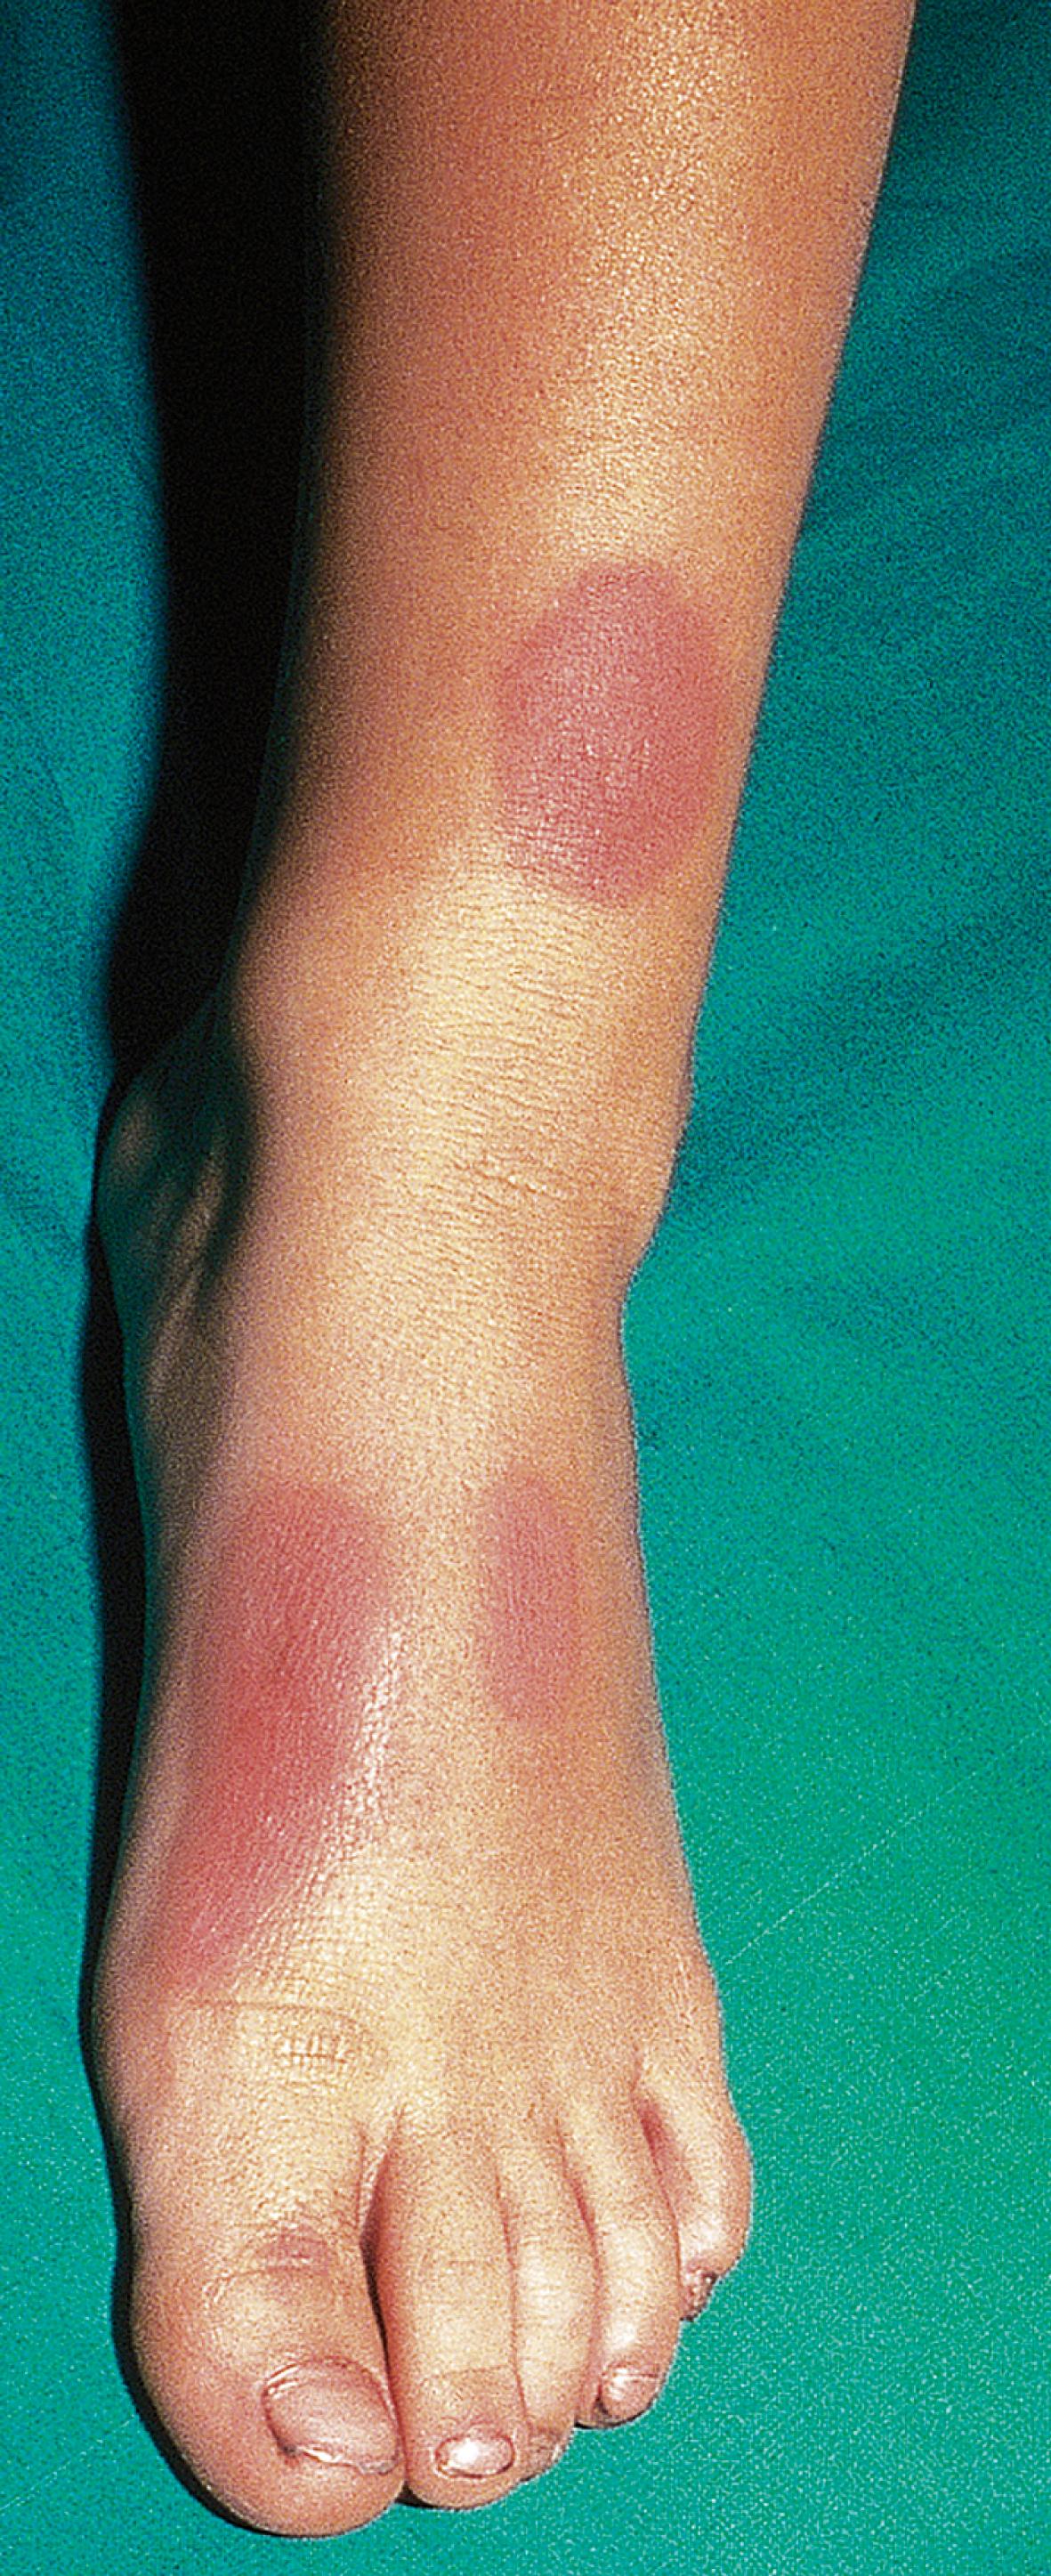 Fig. 54.1, Familial Mediterranean fever. Erythematous rash on the dorsal aspect of the foot and pretibial area of an affected child.